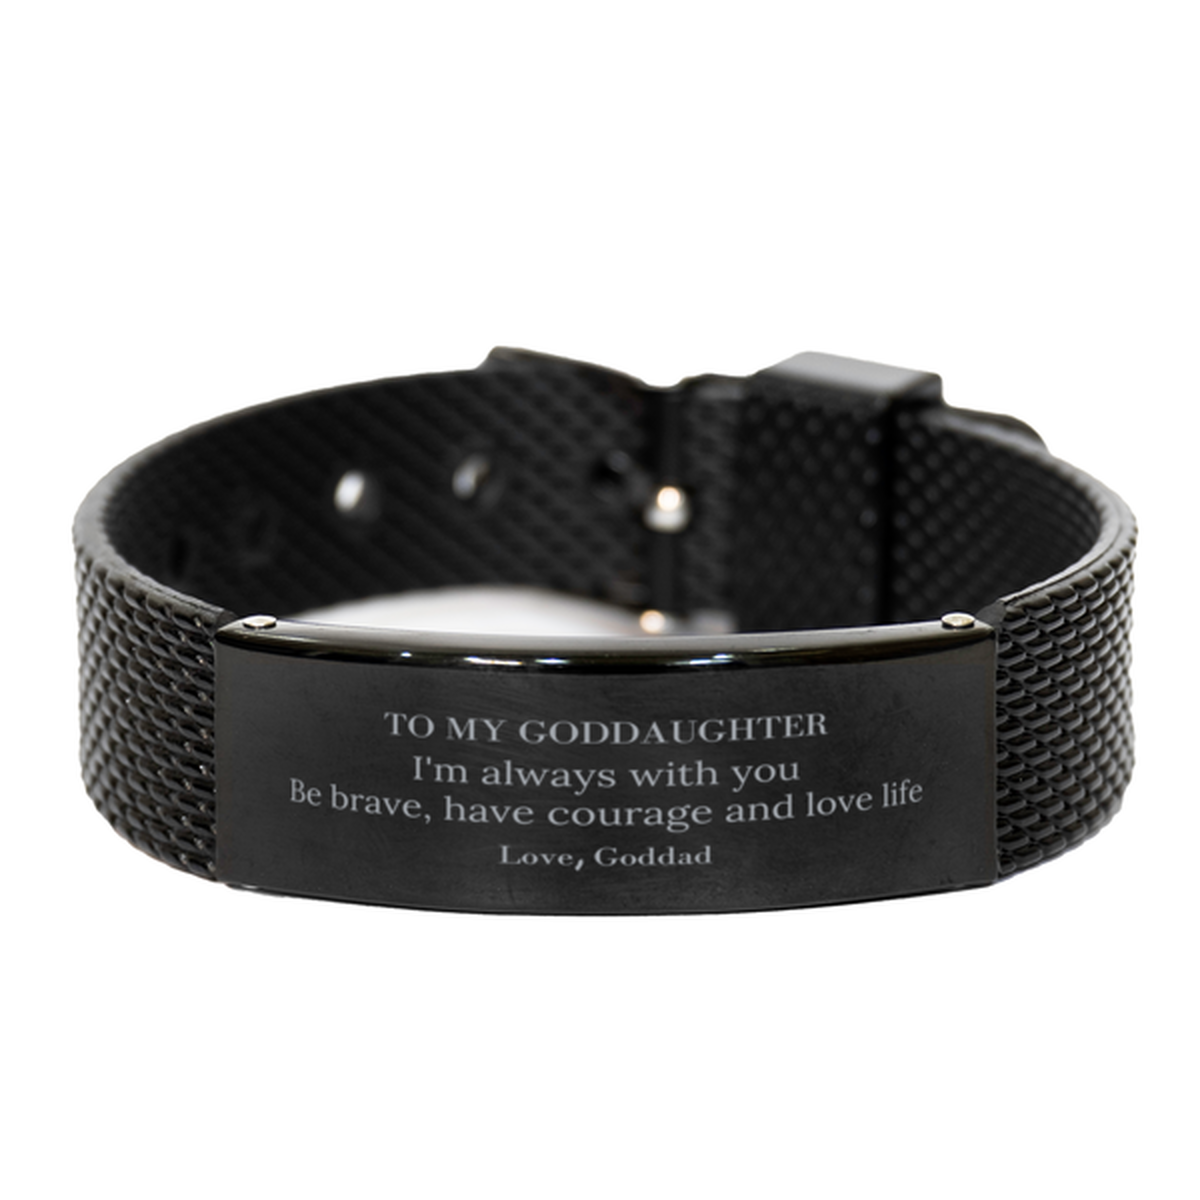 To My Goddaughter Gifts from Goddad, Unique Black Shark Mesh Bracelet Inspirational Christmas Birthday Graduation Gifts for Goddaughter I'm always with you. Be brave, have courage and love life. Love, Goddad